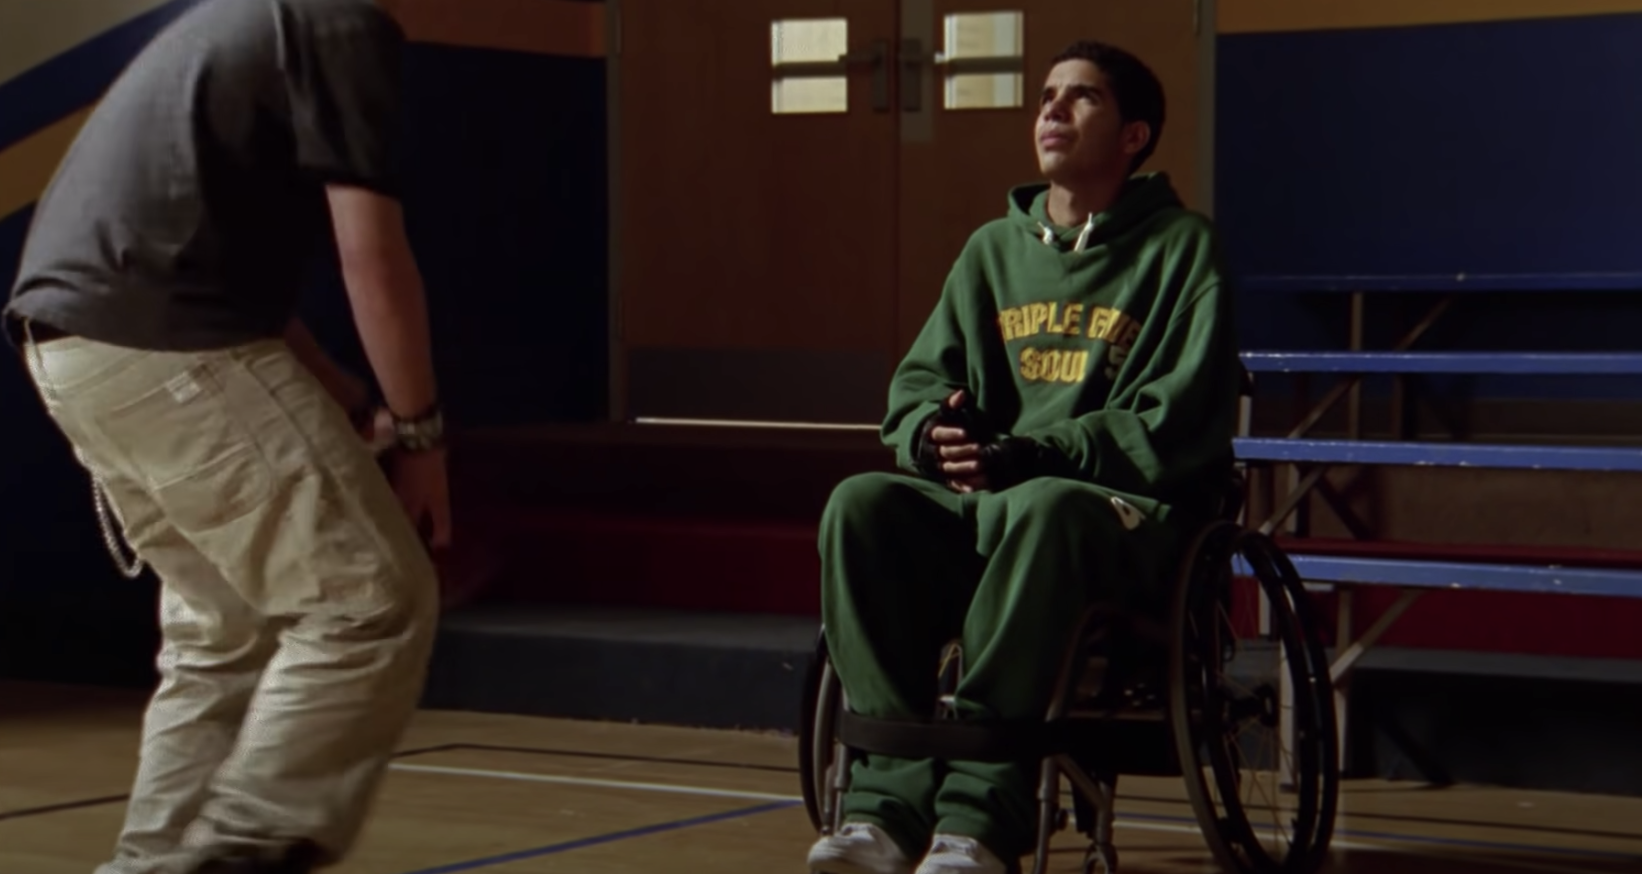 Drake Threatened To Quit And Take Legal Action Against “degrassi” Unless His Character Was